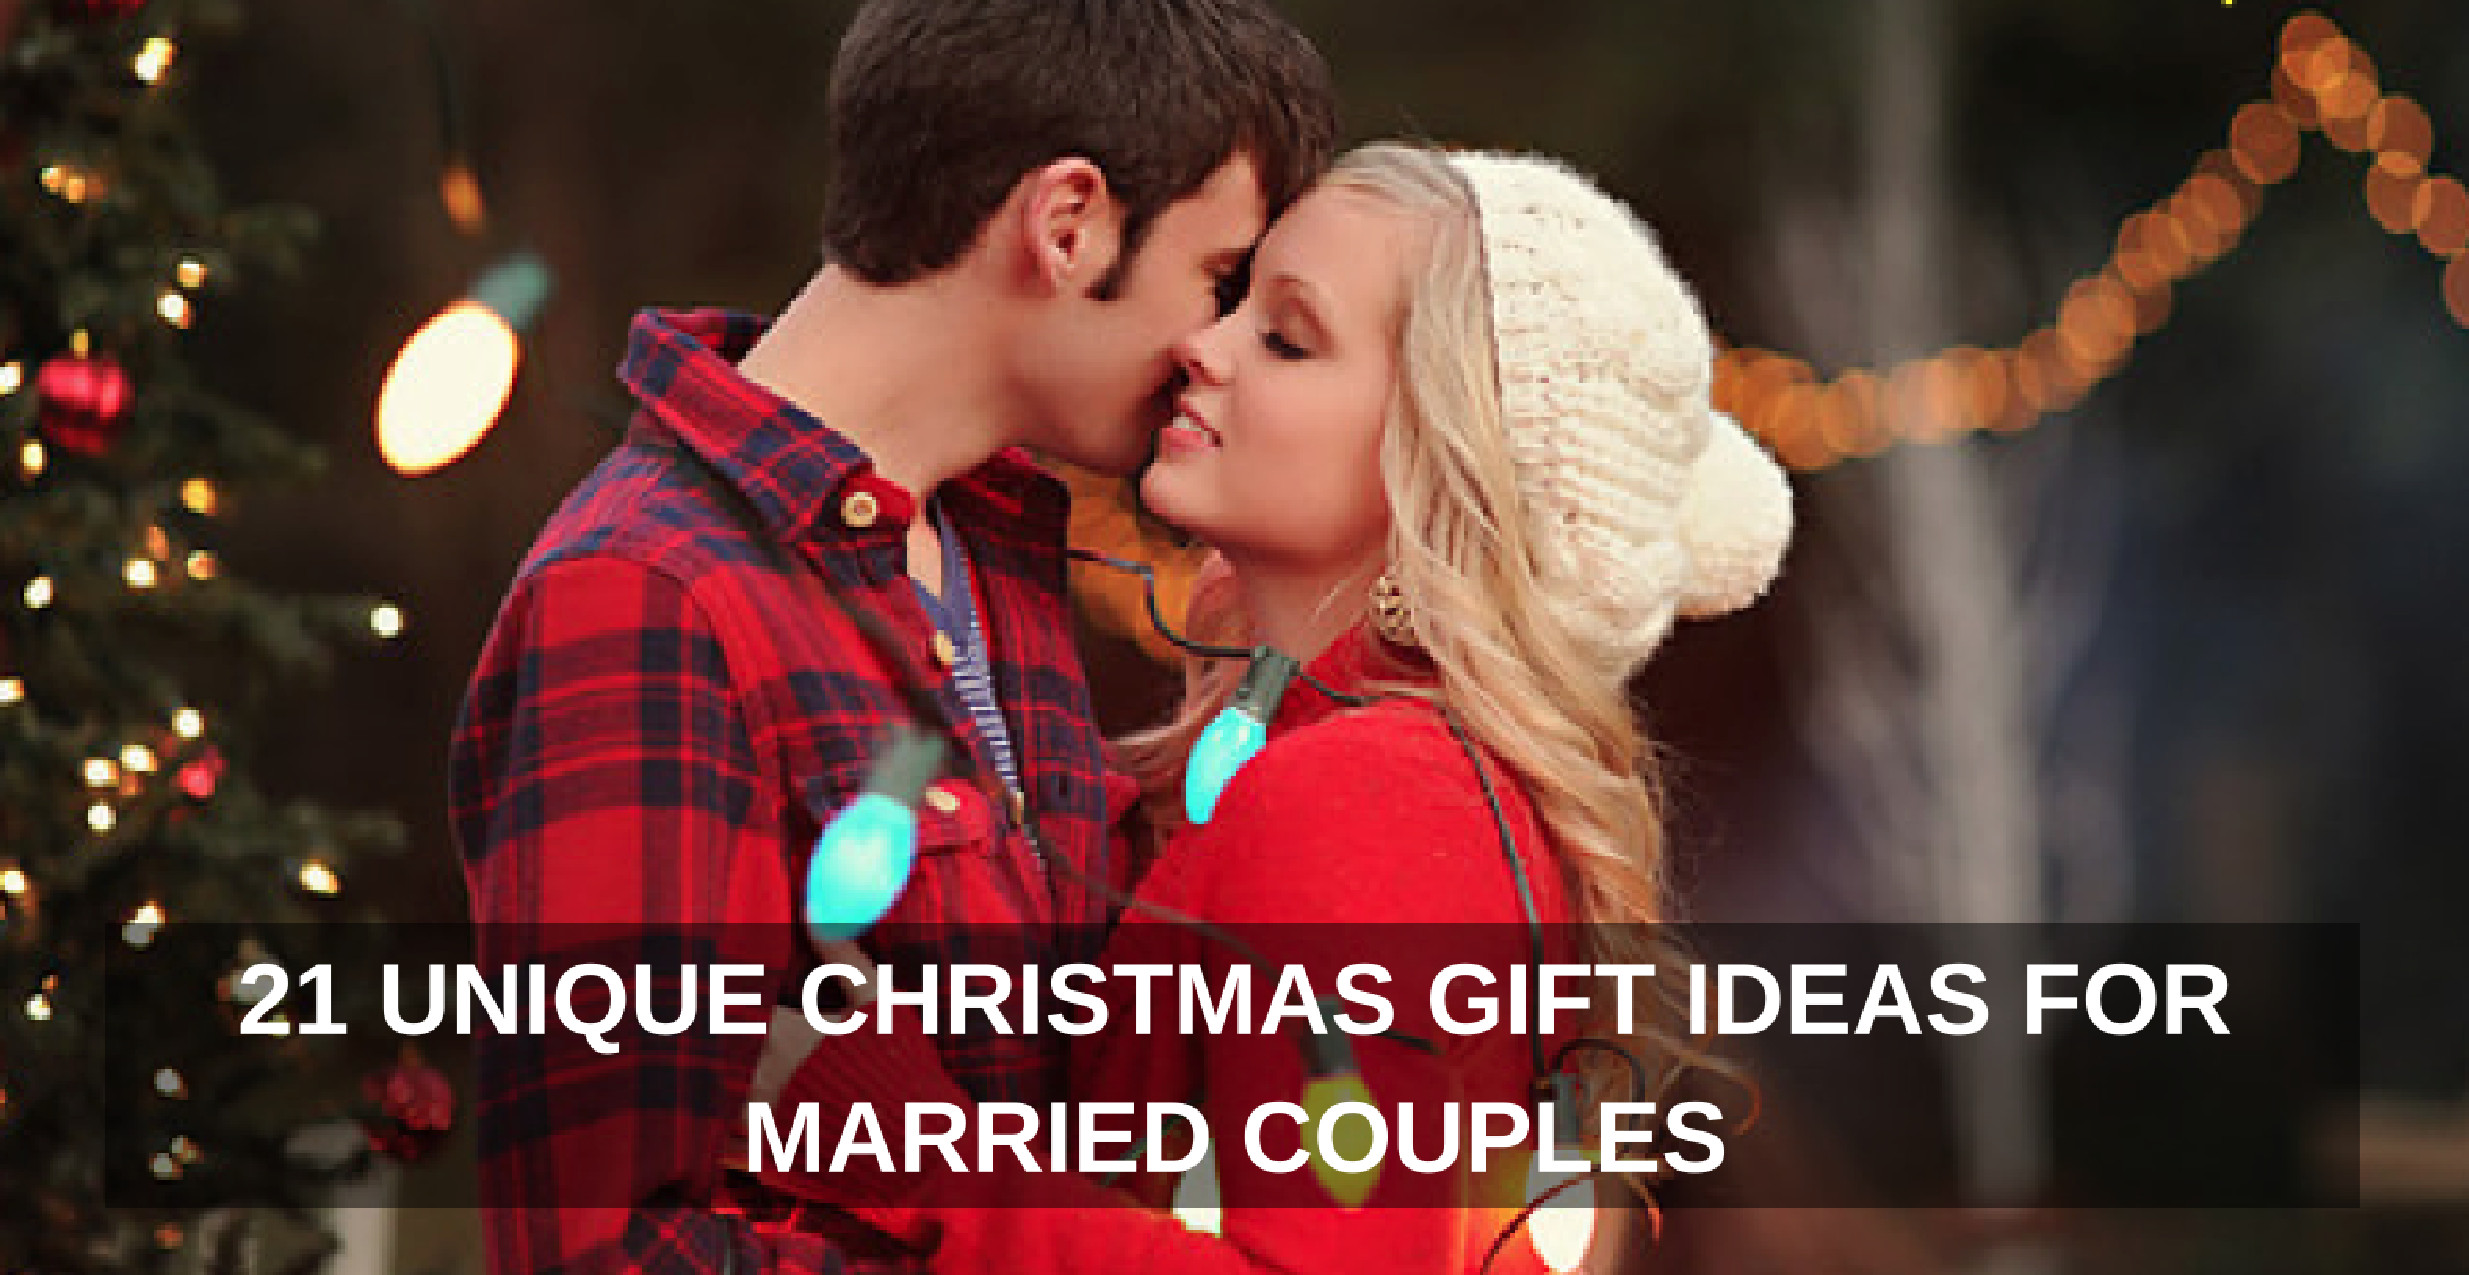 Xmas Gift Ideas For Couples
 21 Unique Christmas Gift Ideas for Married Couples